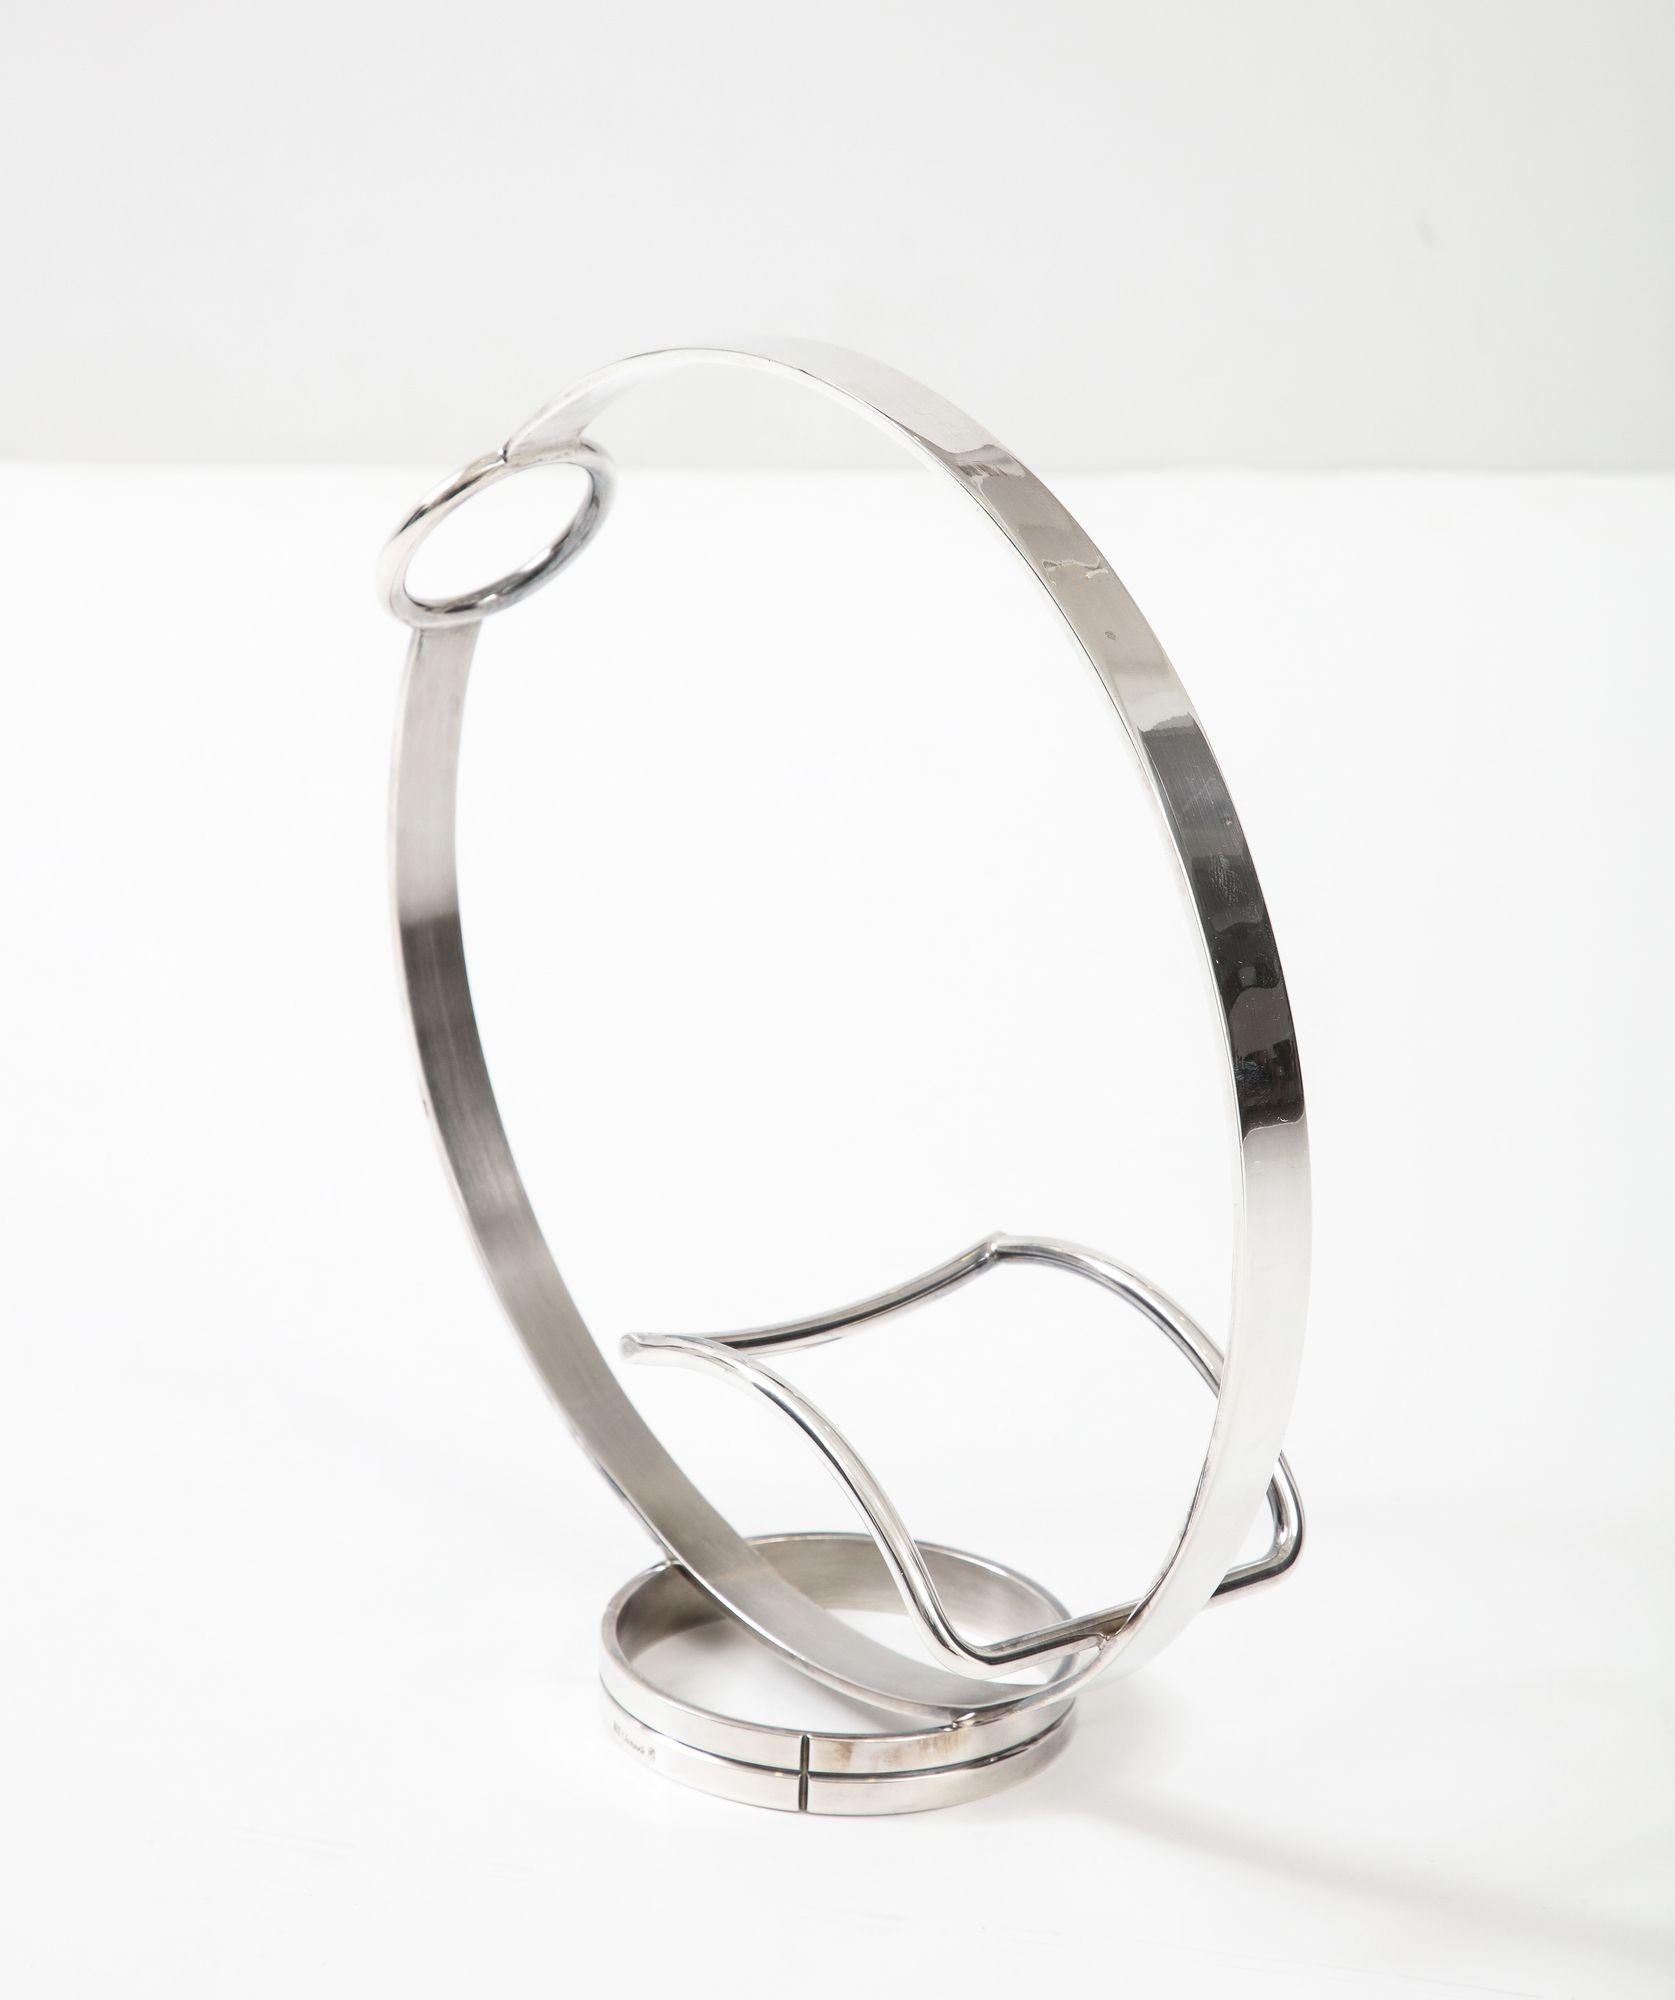 Christofle Silver Plated Wine Holder 2